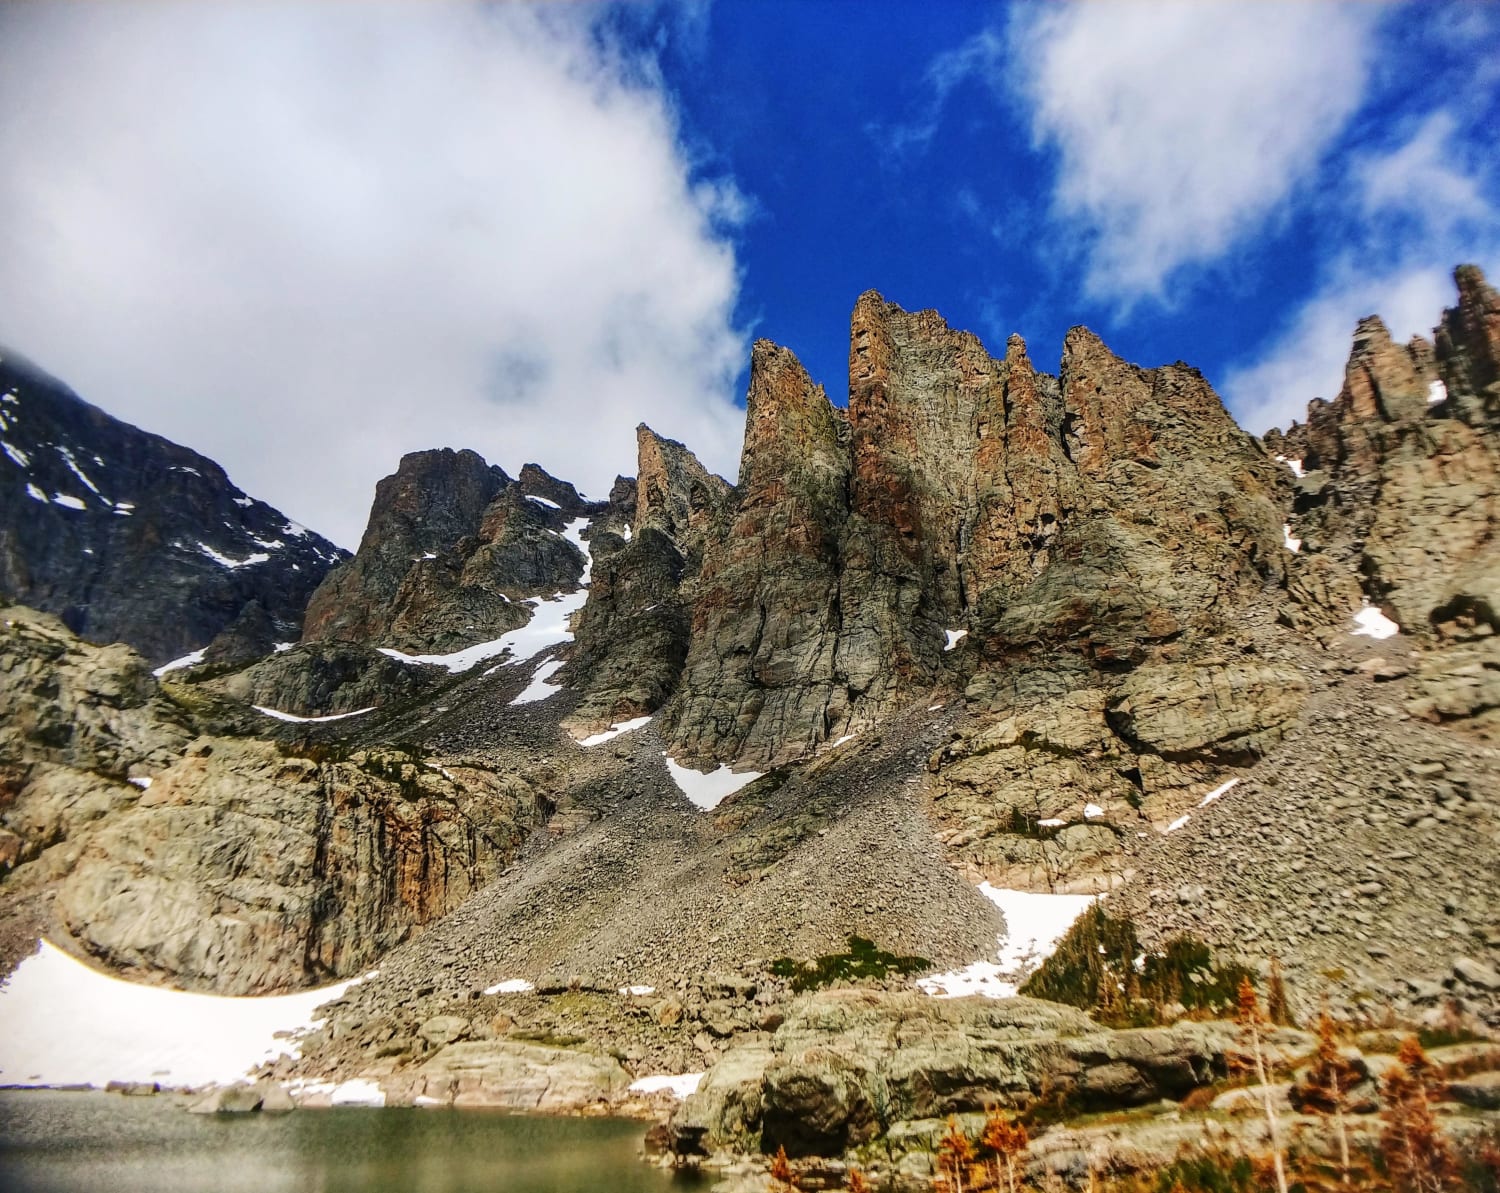 Had a phenomenal sunny windless first visit to this magical place! The Sharktooth behind Sky Pond, Rocky Mountain National Park, Colorado, USA